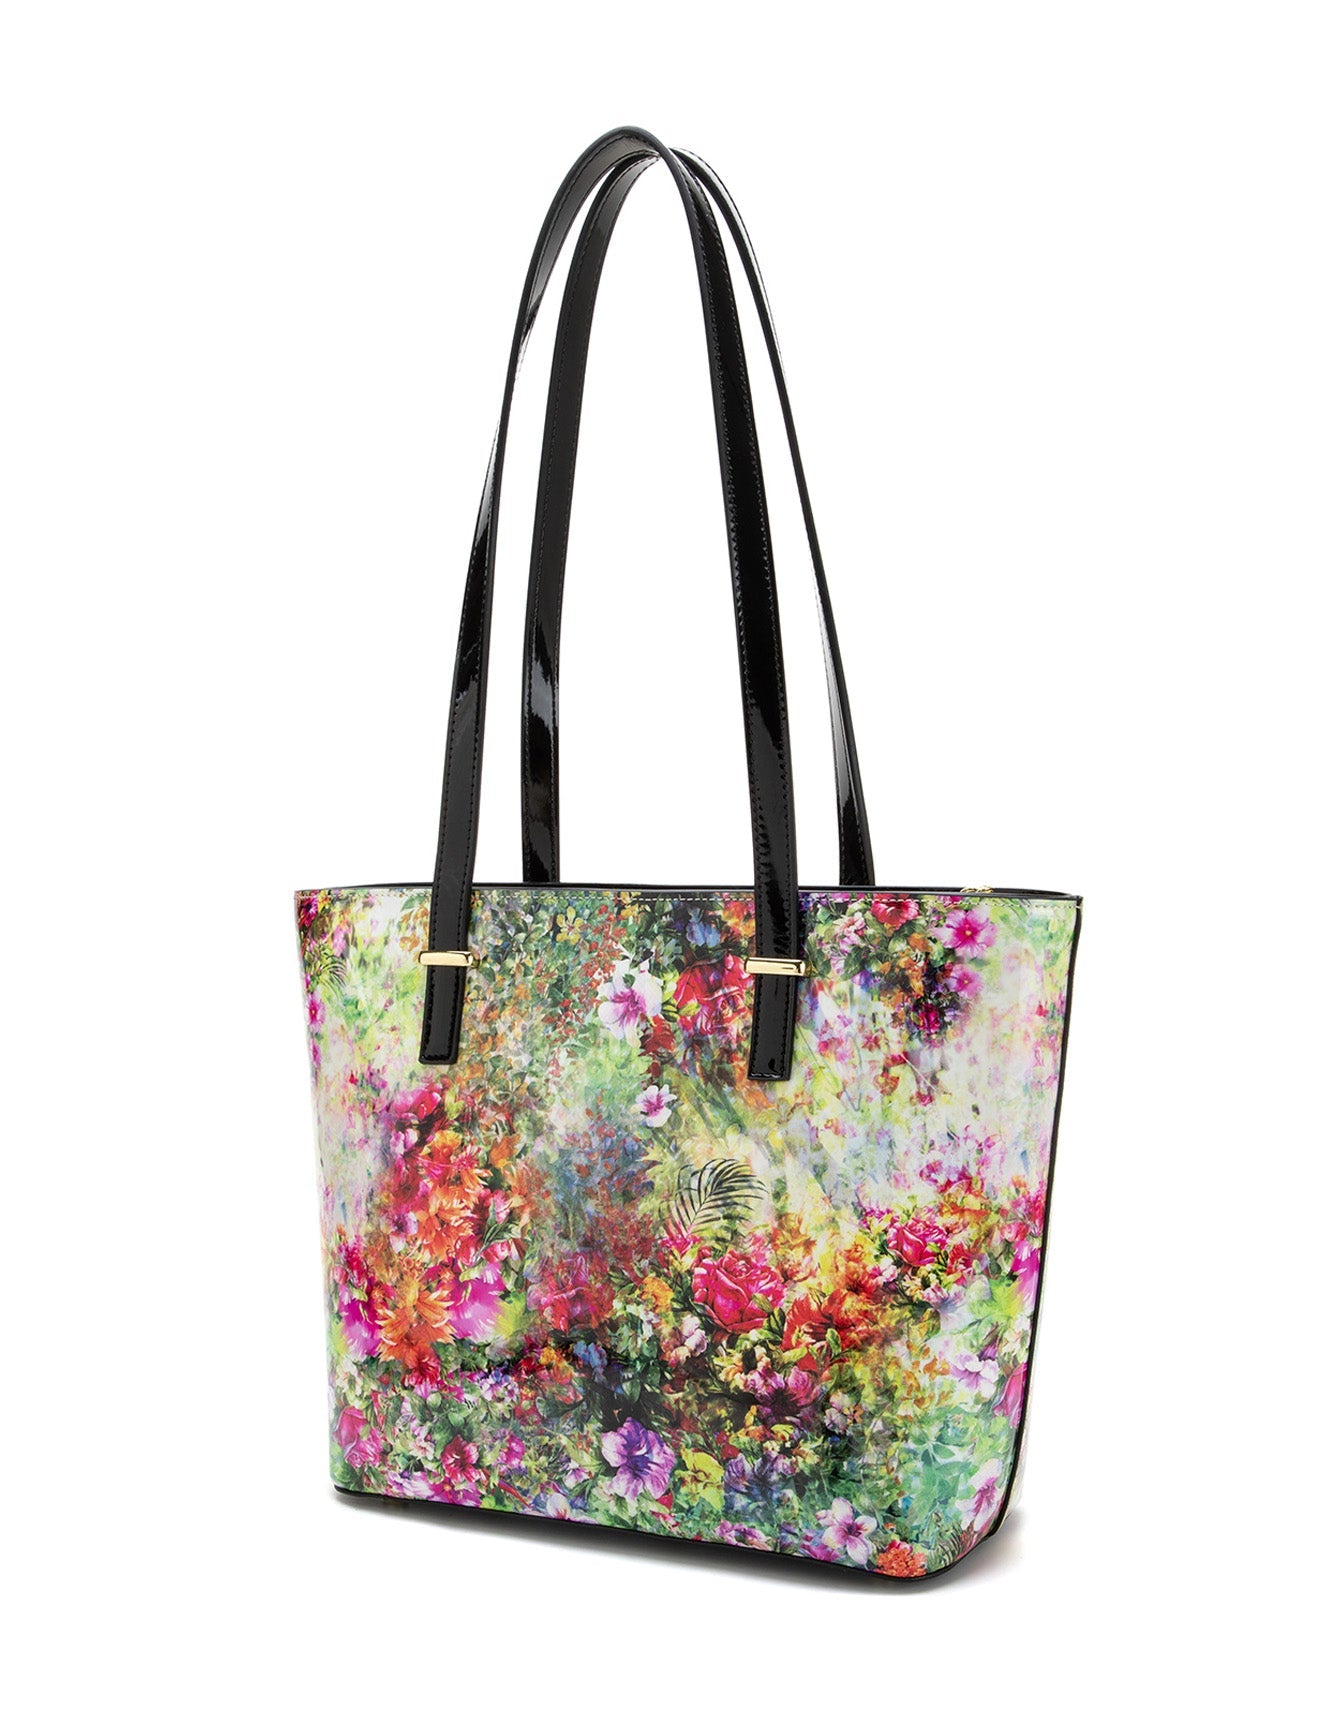 Serenade - SN81-0817 Fiore Large Leather tote - Floral-4